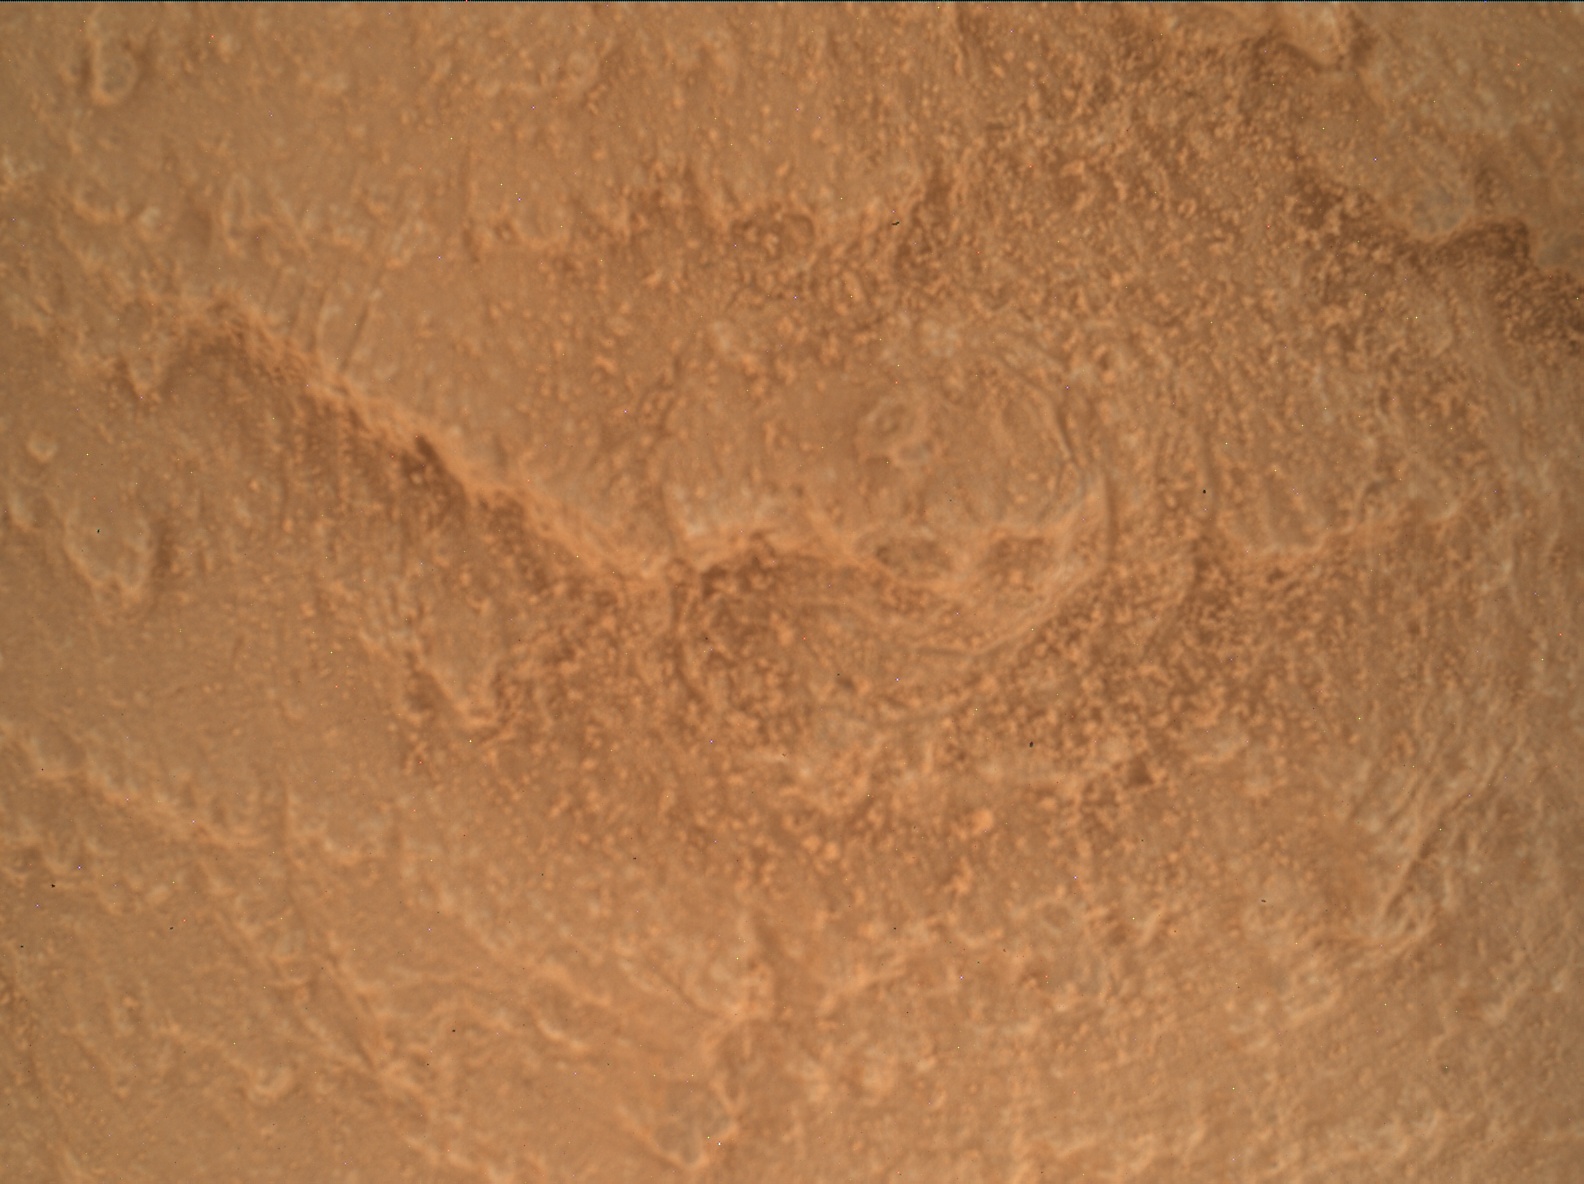 Nasa's Mars rover Curiosity acquired this image using its Mars Hand Lens Imager (MAHLI) on Sol 3914